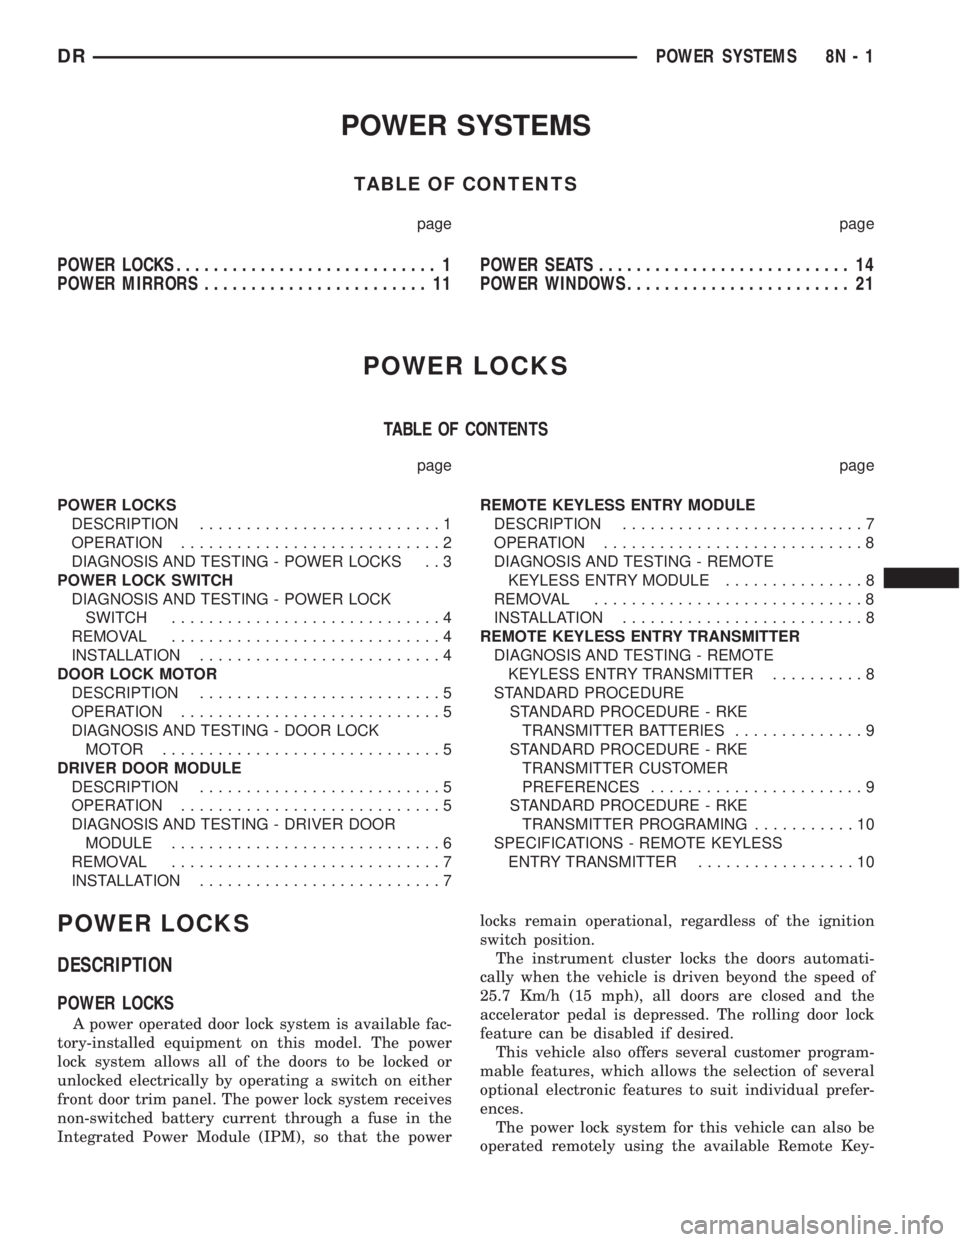 DODGE RAM 2003  Service User Guide POWER SYSTEMS
TABLE OF CONTENTS
page page
POWER LOCKS............................ 1
POWER MIRRORS........................ 11POWER SEATS........................... 14
POWER WINDOWS.....................